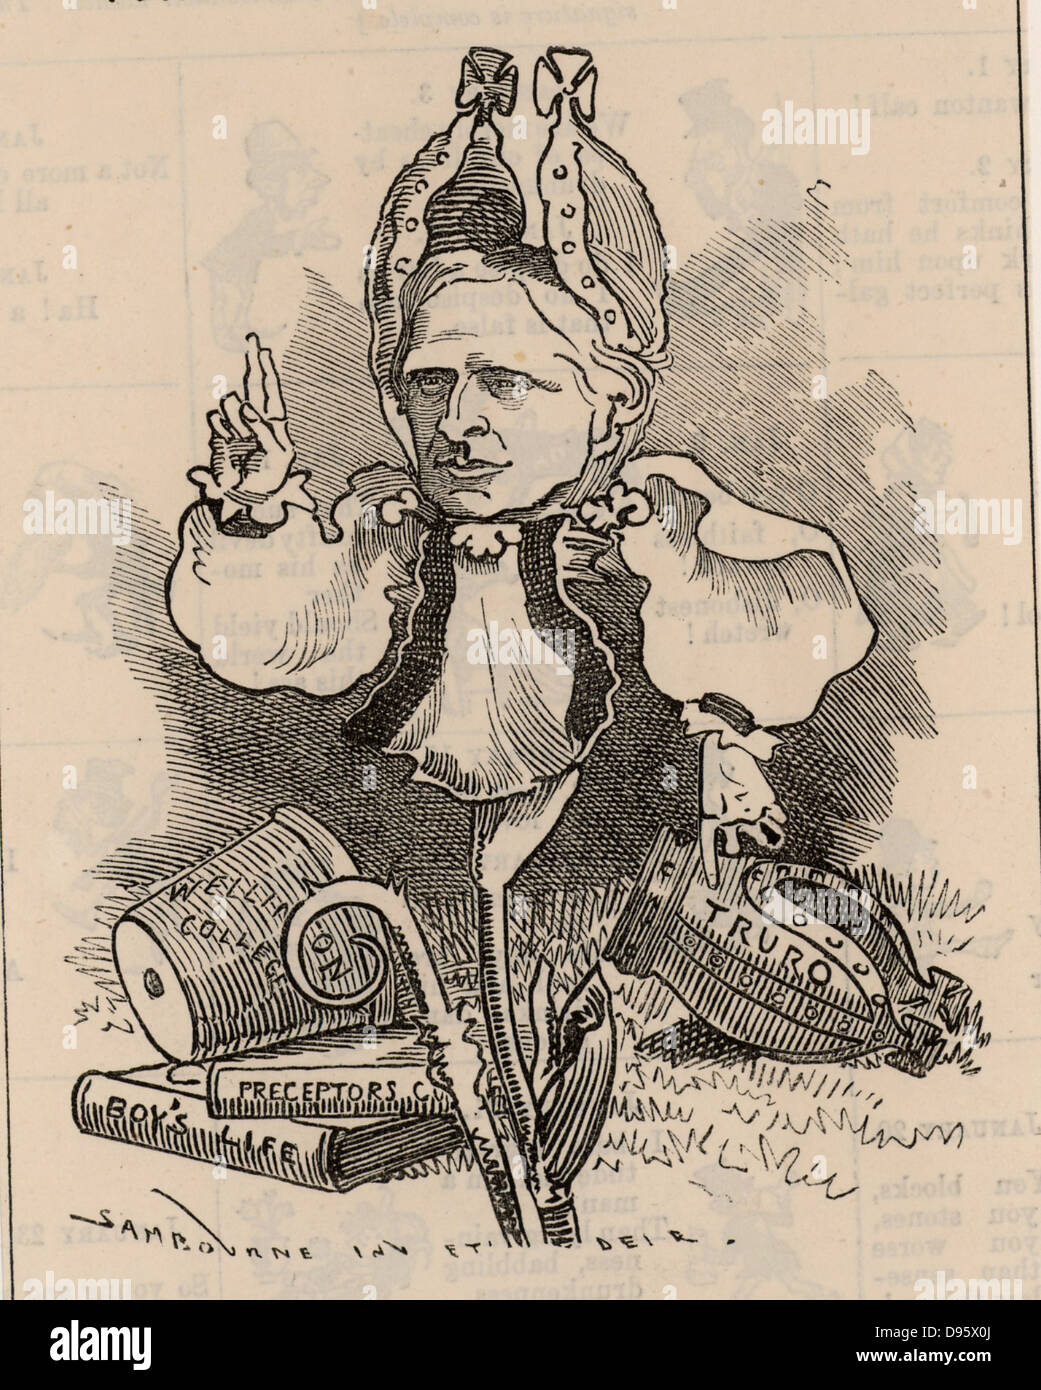 Edward White Benson (1829-1896) English churchman and schoolmaster. First headmaster of Wellington College, Berkshire (1859). First Bishop of Truro (1877-1883), Archbishop of Canterbury (1882-1896).   Cartoon by Edward Linley Sambourne in Punch's Fancy Portraits series from 'Punch' (London, 6 January 1883). Stock Photo